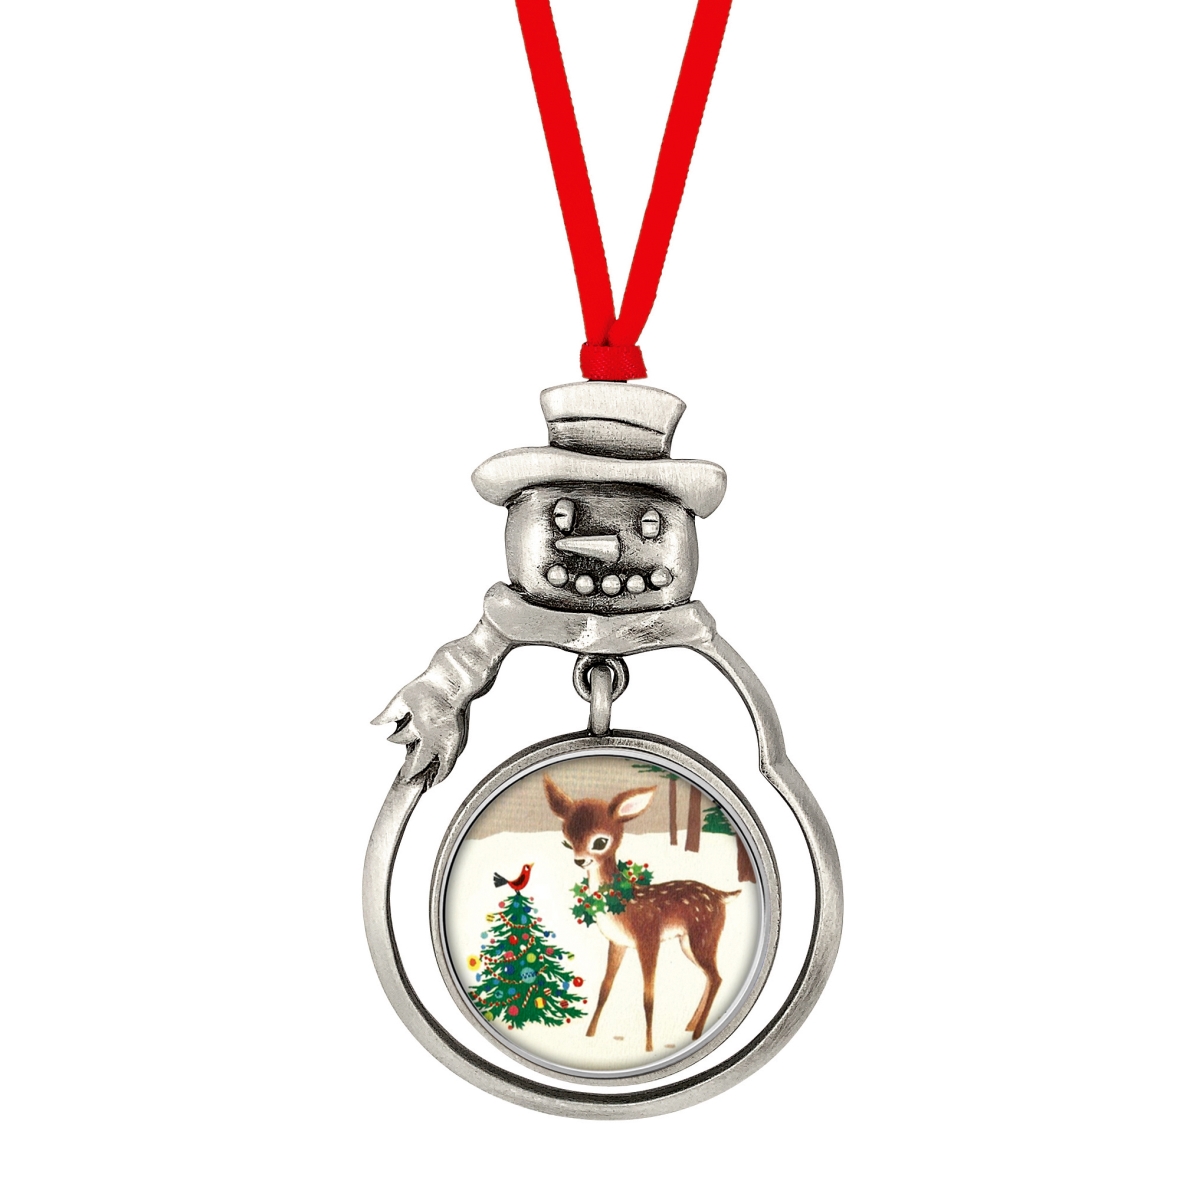 Picture of American Coin Treasures 16614 JFK Half Dollar Snowman Ornament with Colorized Reindeer Coin